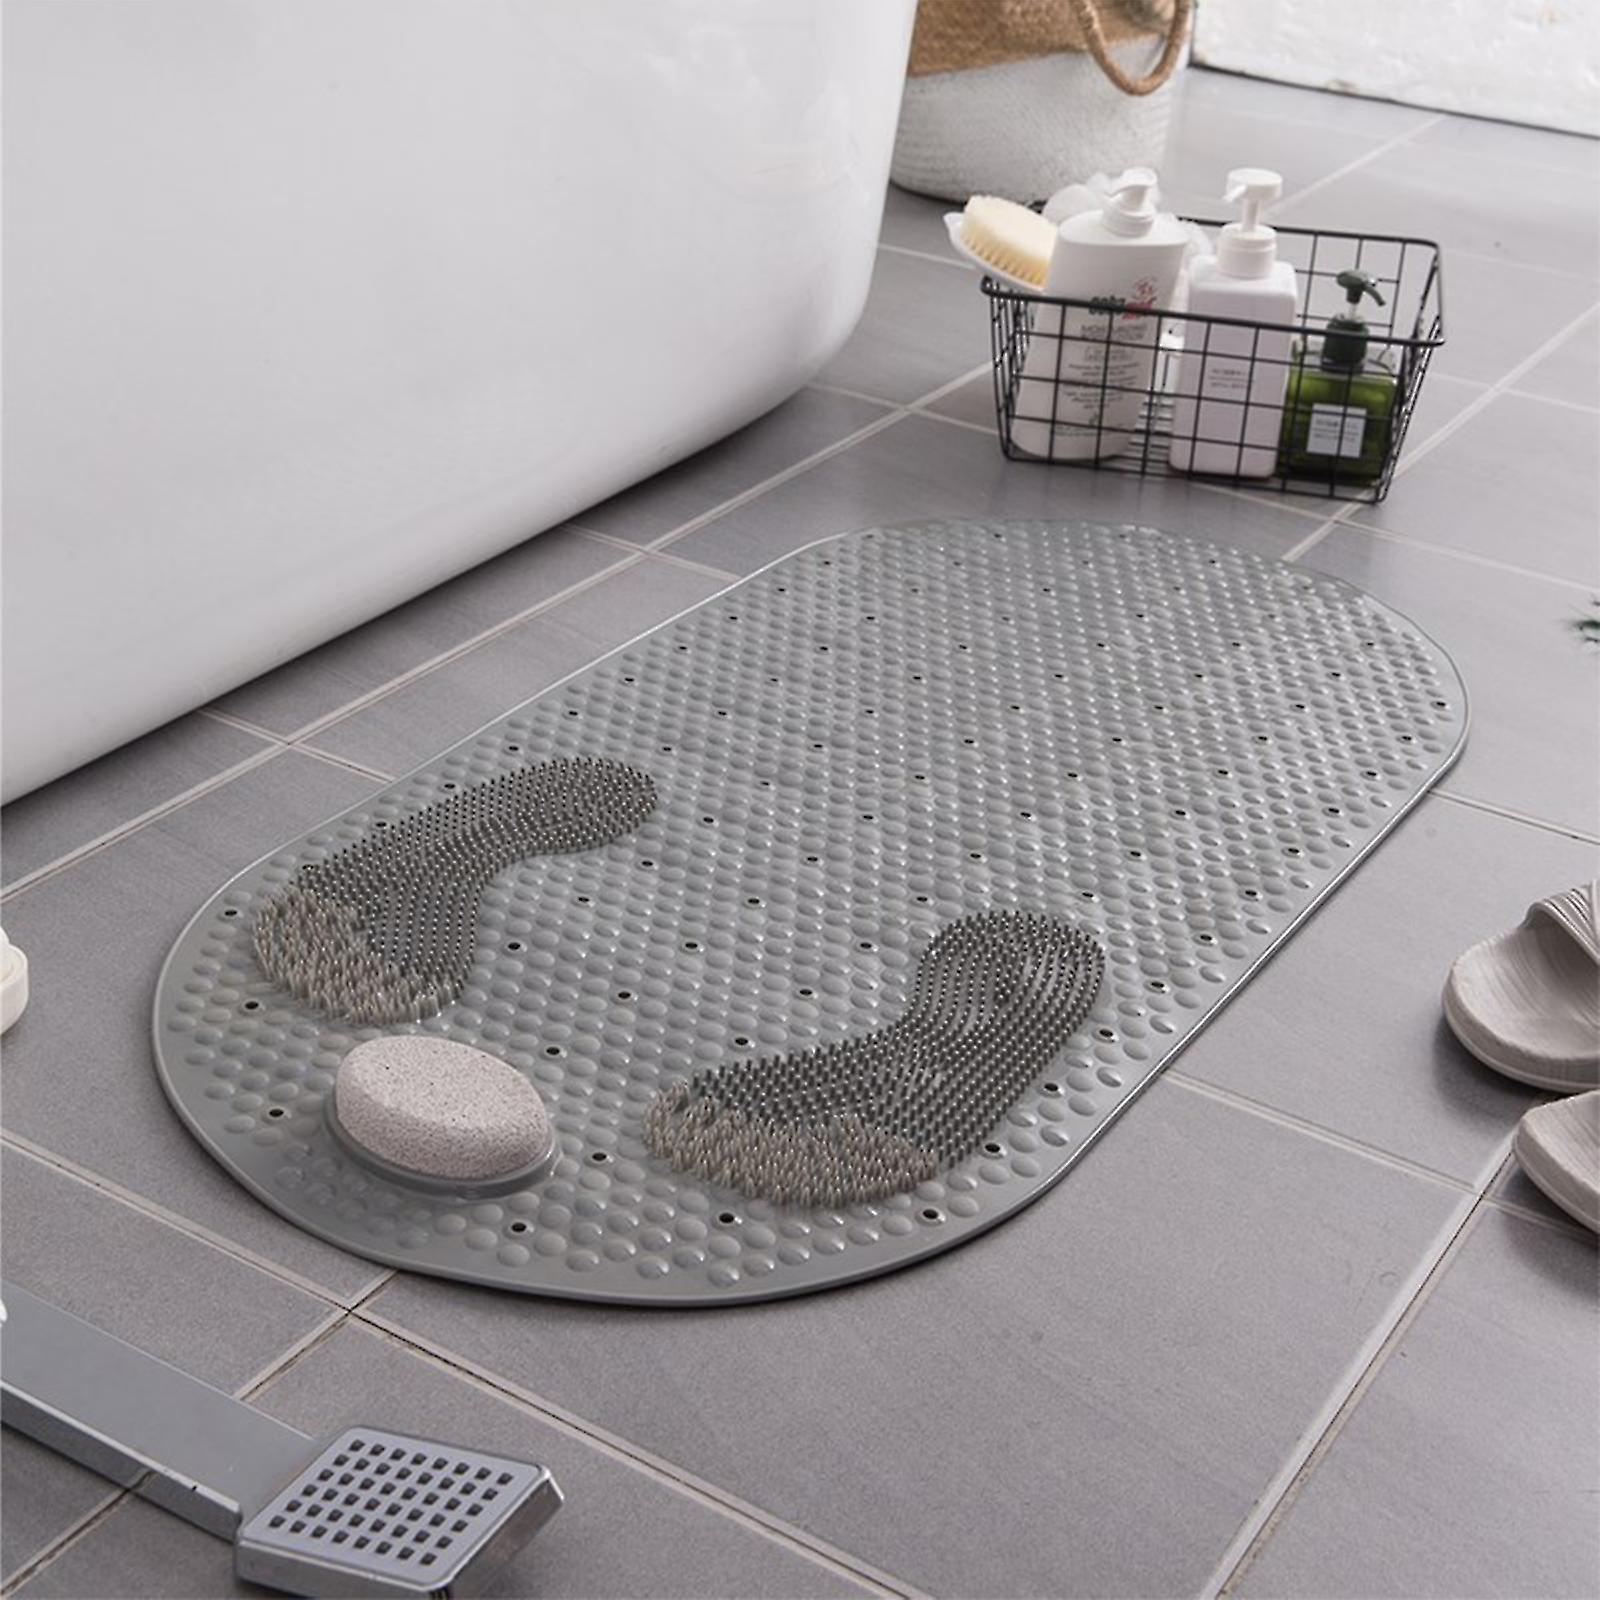 3 in 1 Pumice Stone Callus Remover Bath Mat Foot Massager Tool with Anti-Slip Suction Cup and Drain Holes